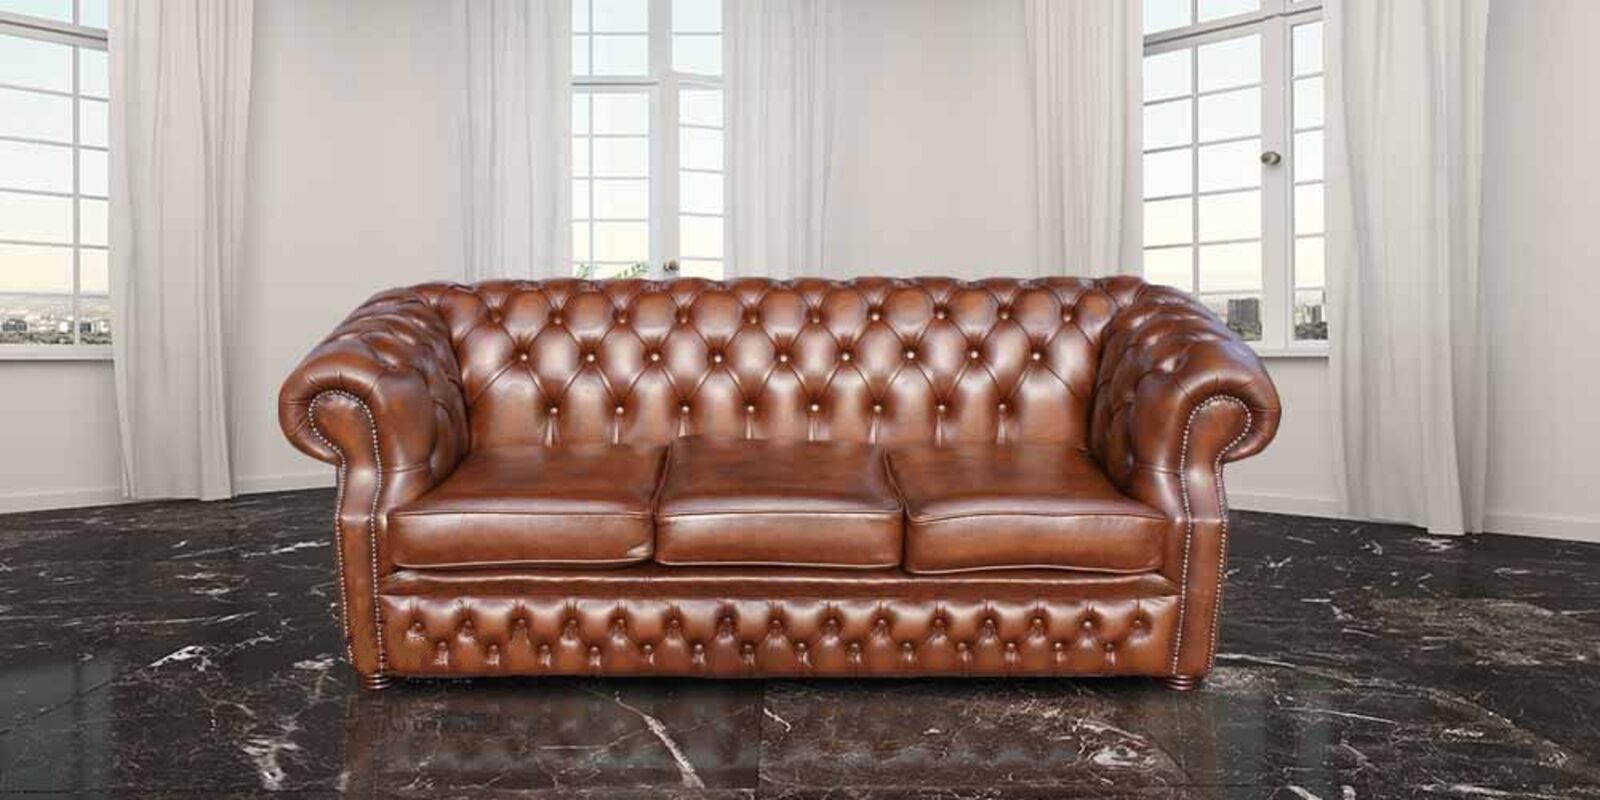 Product photograph of Chesterfield Richmond Grand 3 Seater Antique Tan Leather Sofa Settee Offer from Designer Sofas 4U